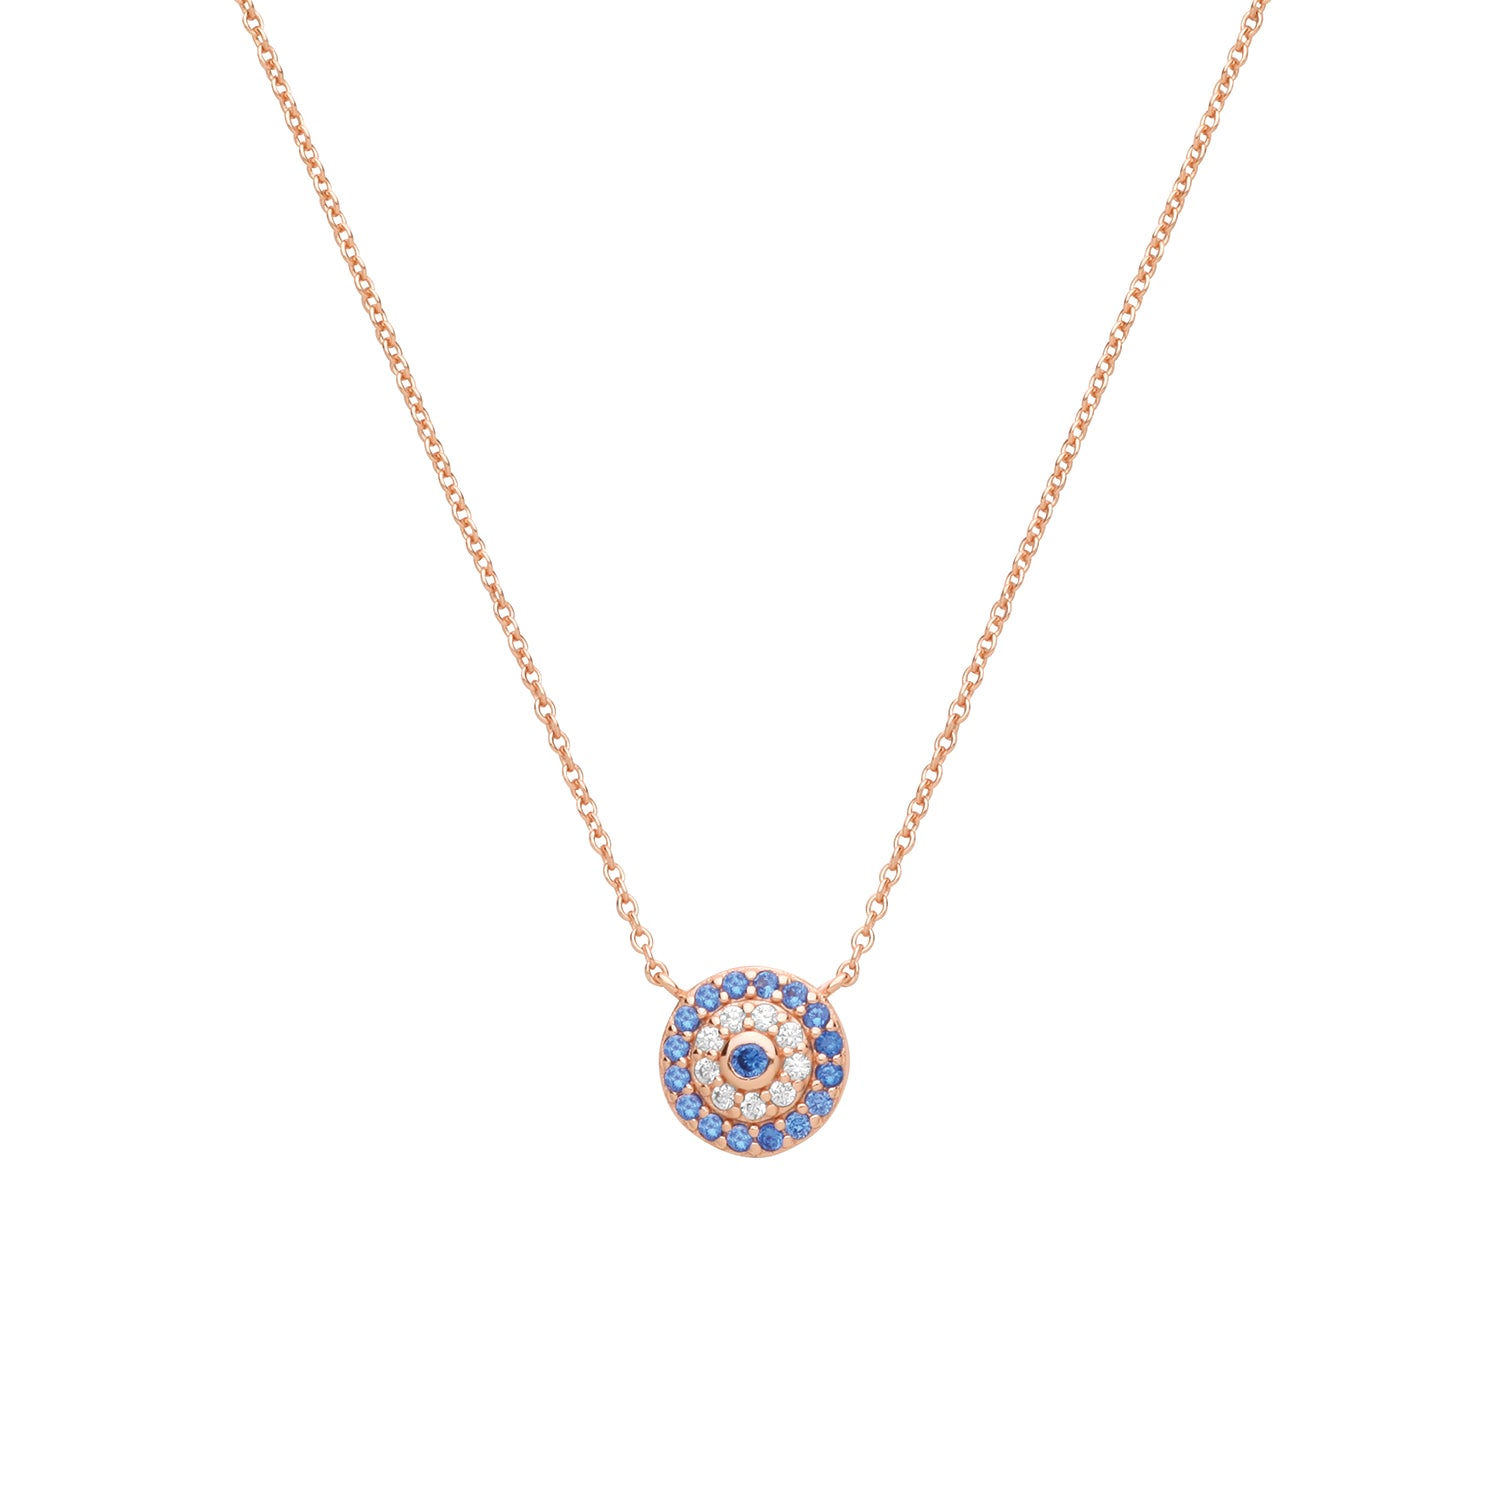 SILVER ROSE GOLD PLATED WHITE AND BLUE CZ EVIL EYE NECKLET